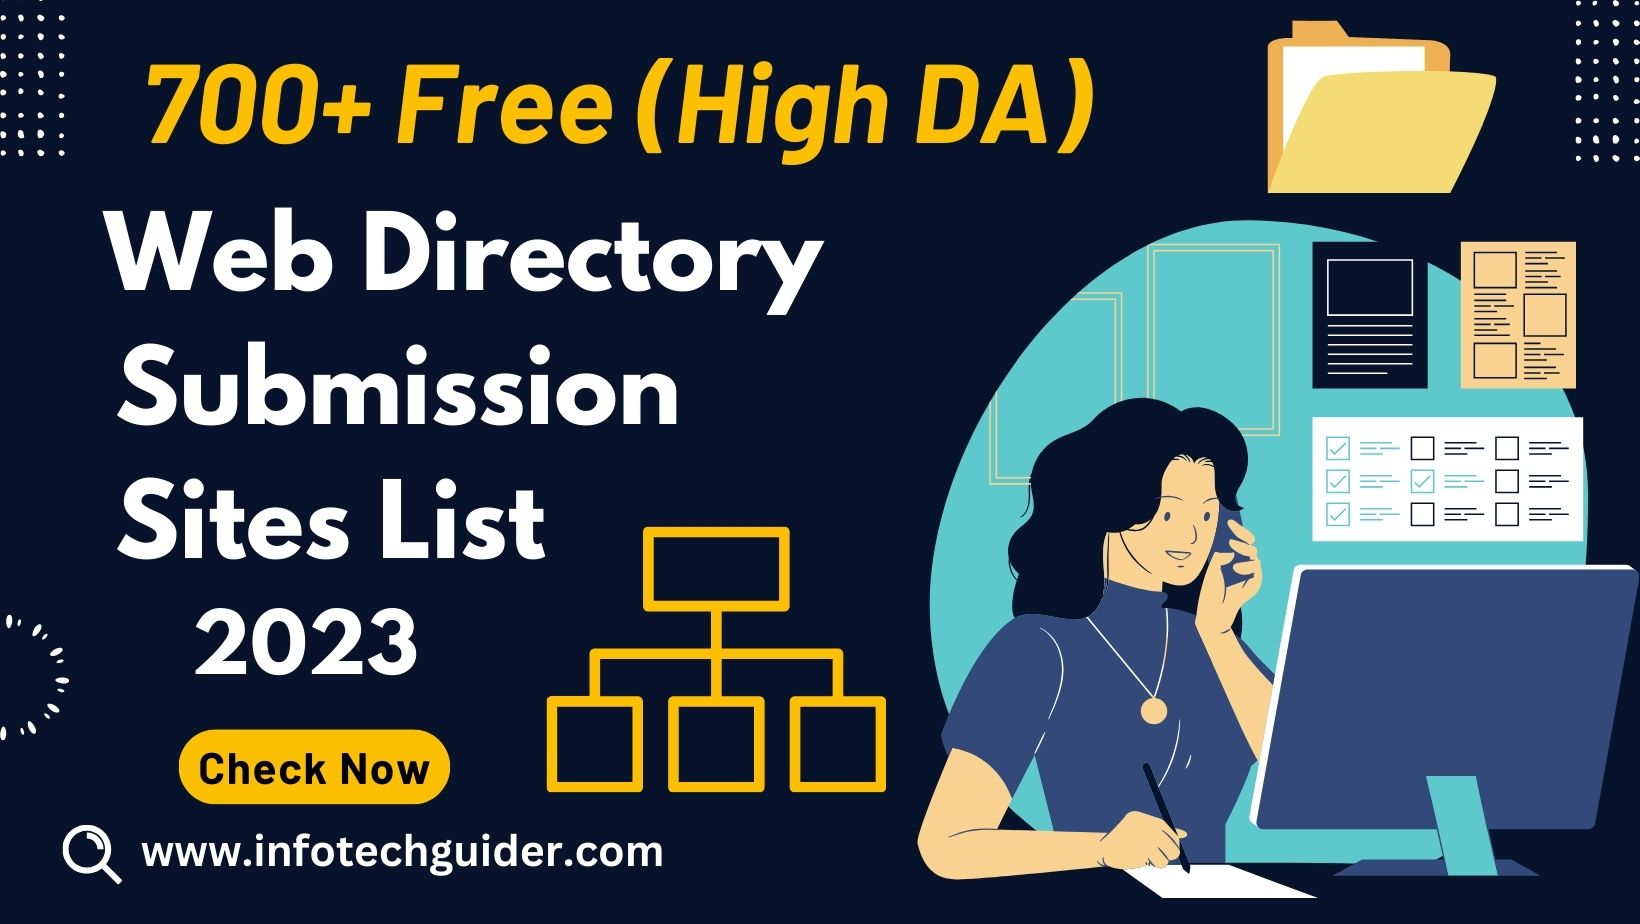 Web Directory Submission Sites List